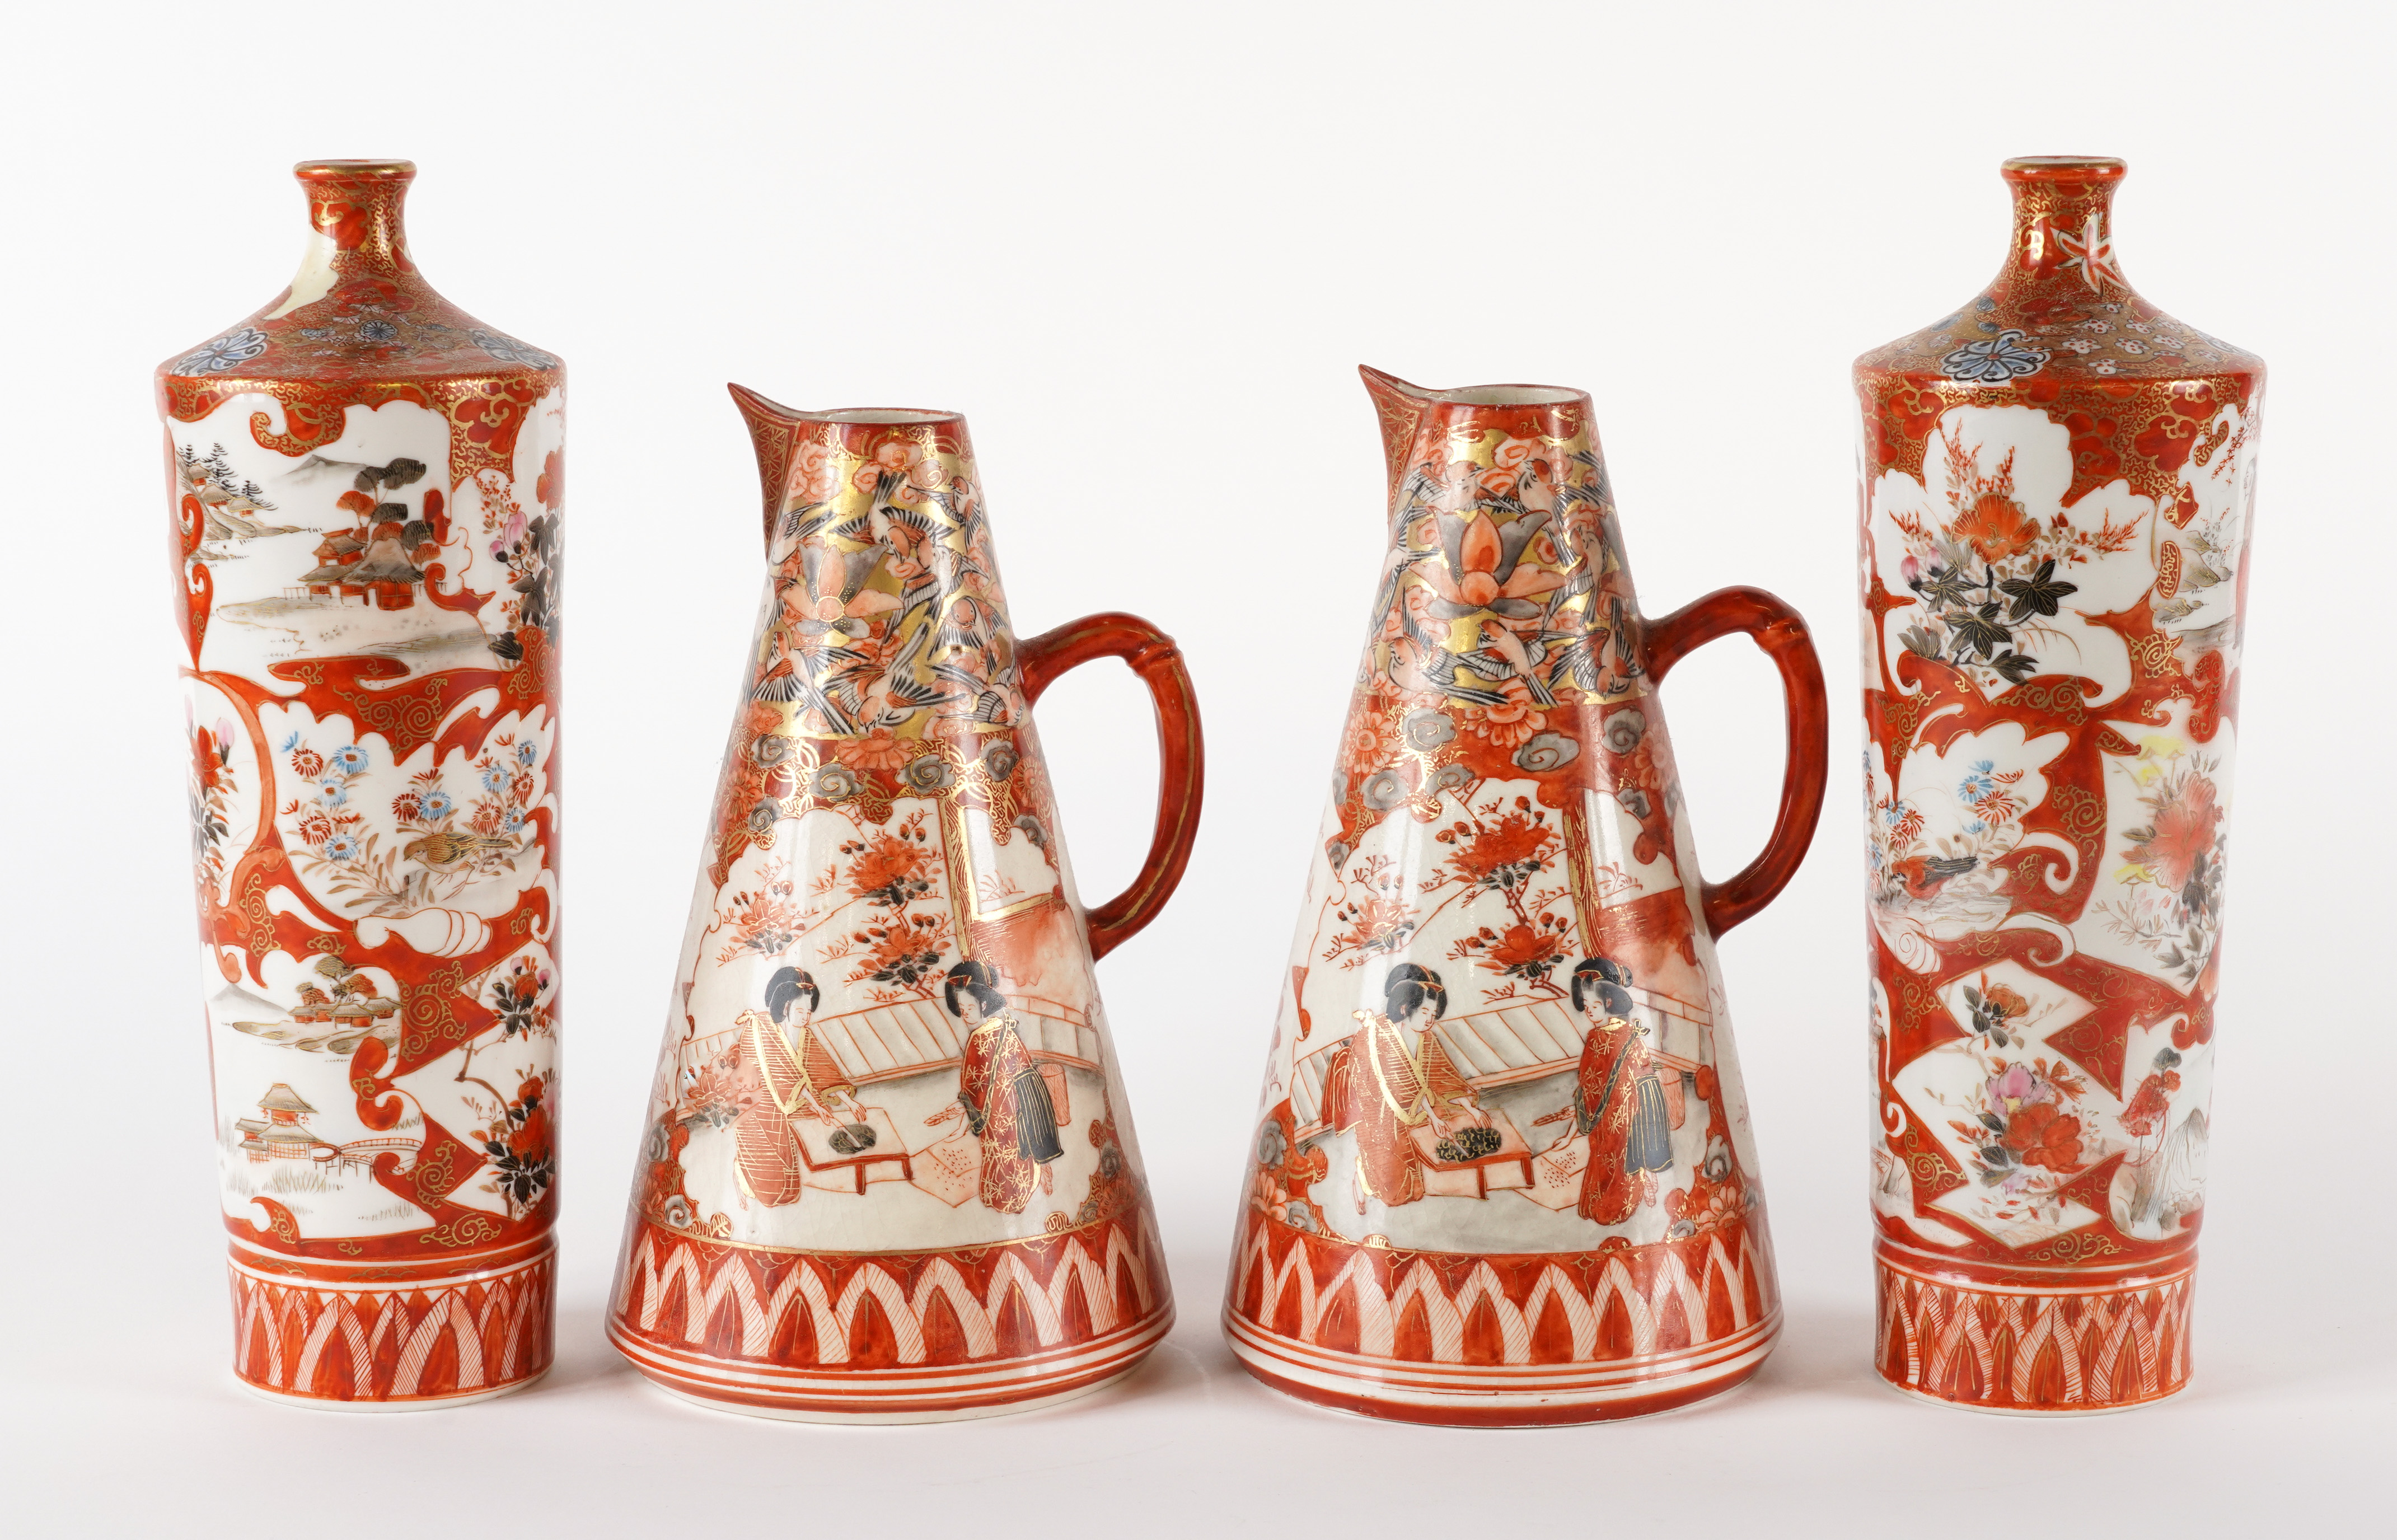 A PAIR OF JAPANESE KUTANI CONICAL JUGS AND A PAIR OF TAPERED CYLINDRICAL VASES (4)